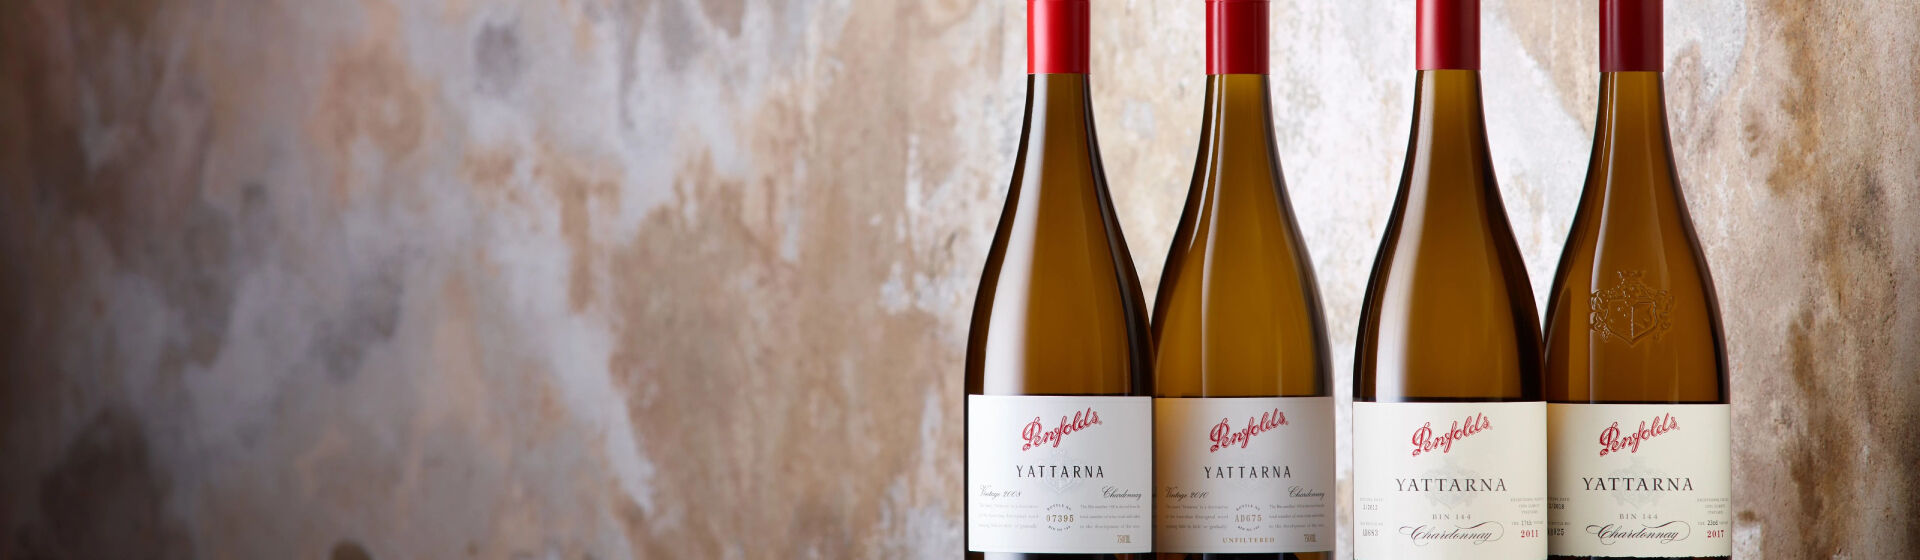 Penfolds White Wine Article